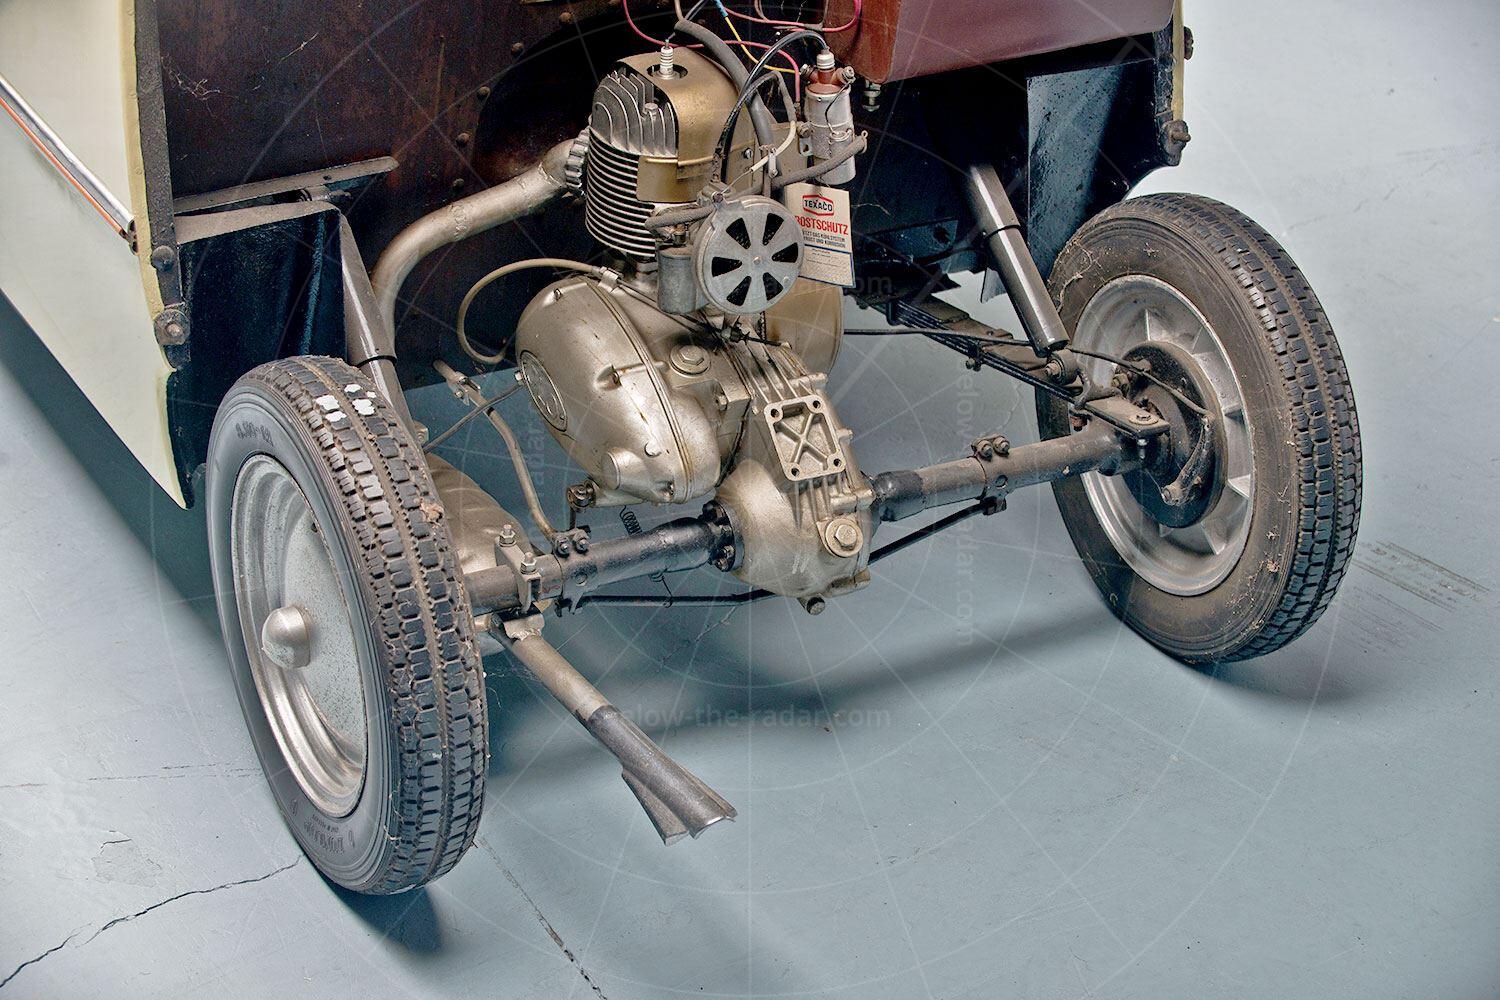 Daus microcar prototype engine Pic: RM Sotheby's | Daus microcar prototype engine